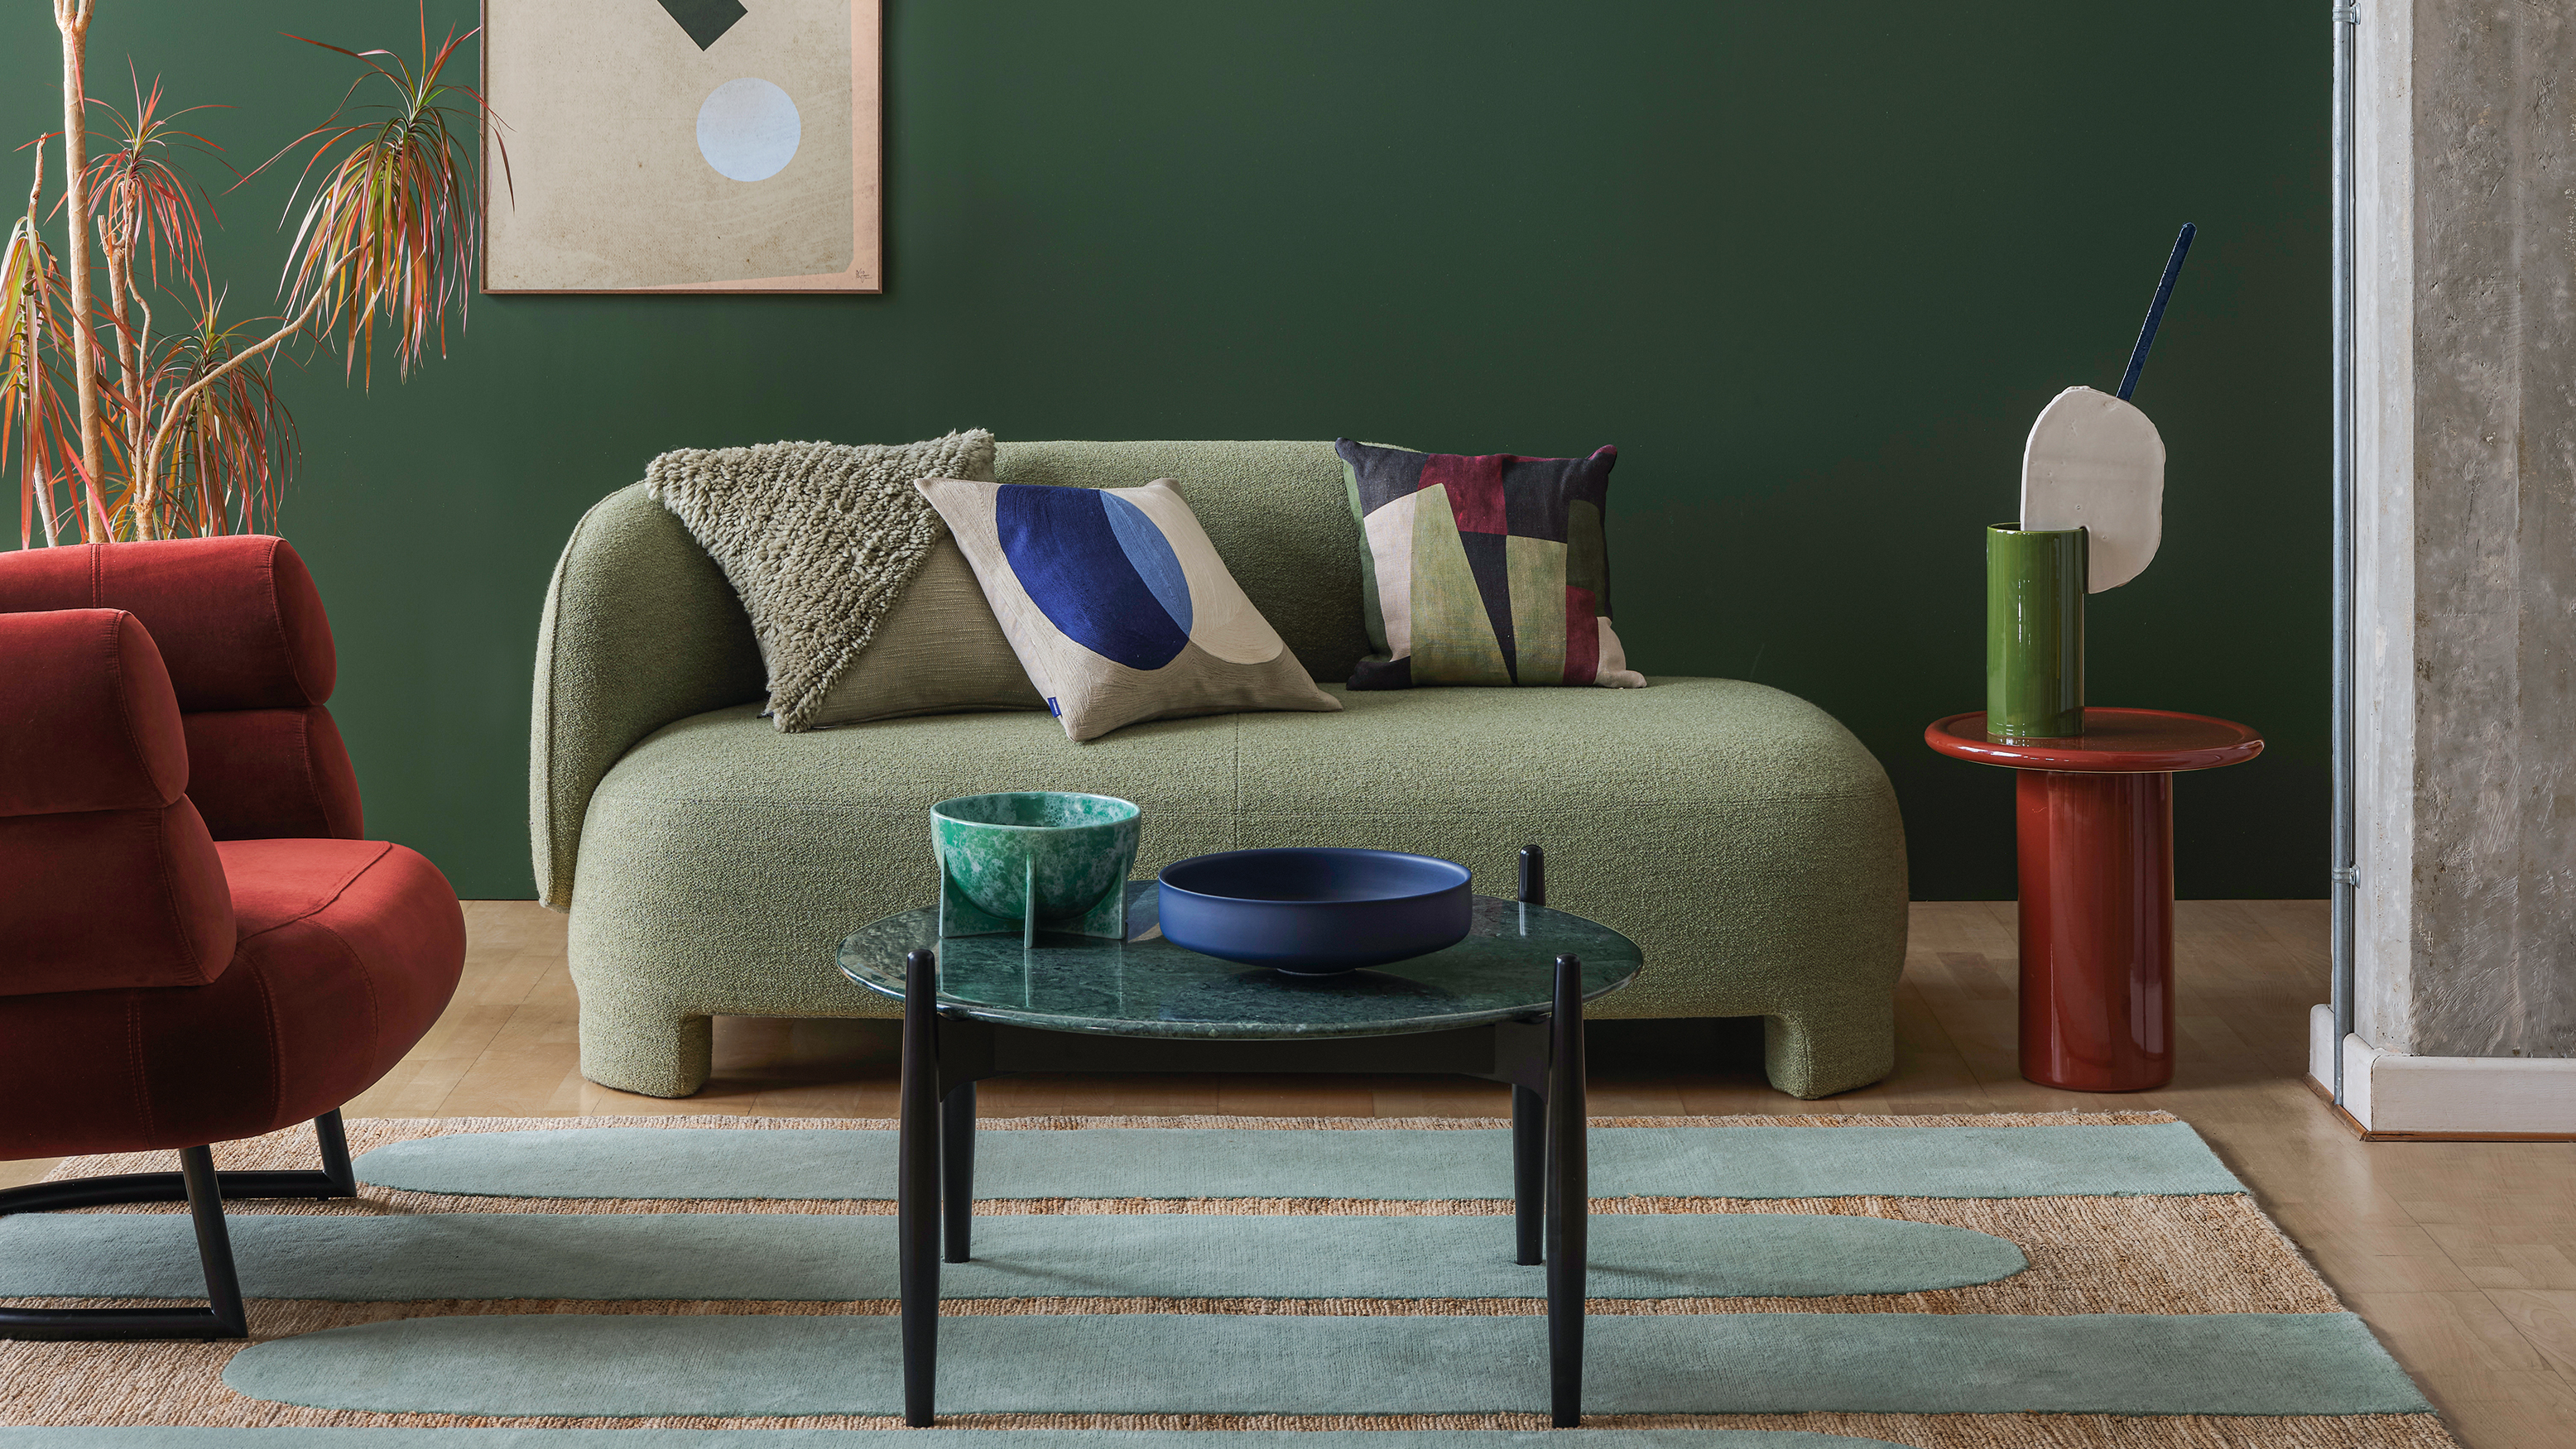 Sage Green: 18 Ideas for Decorating With the Soothing Hue